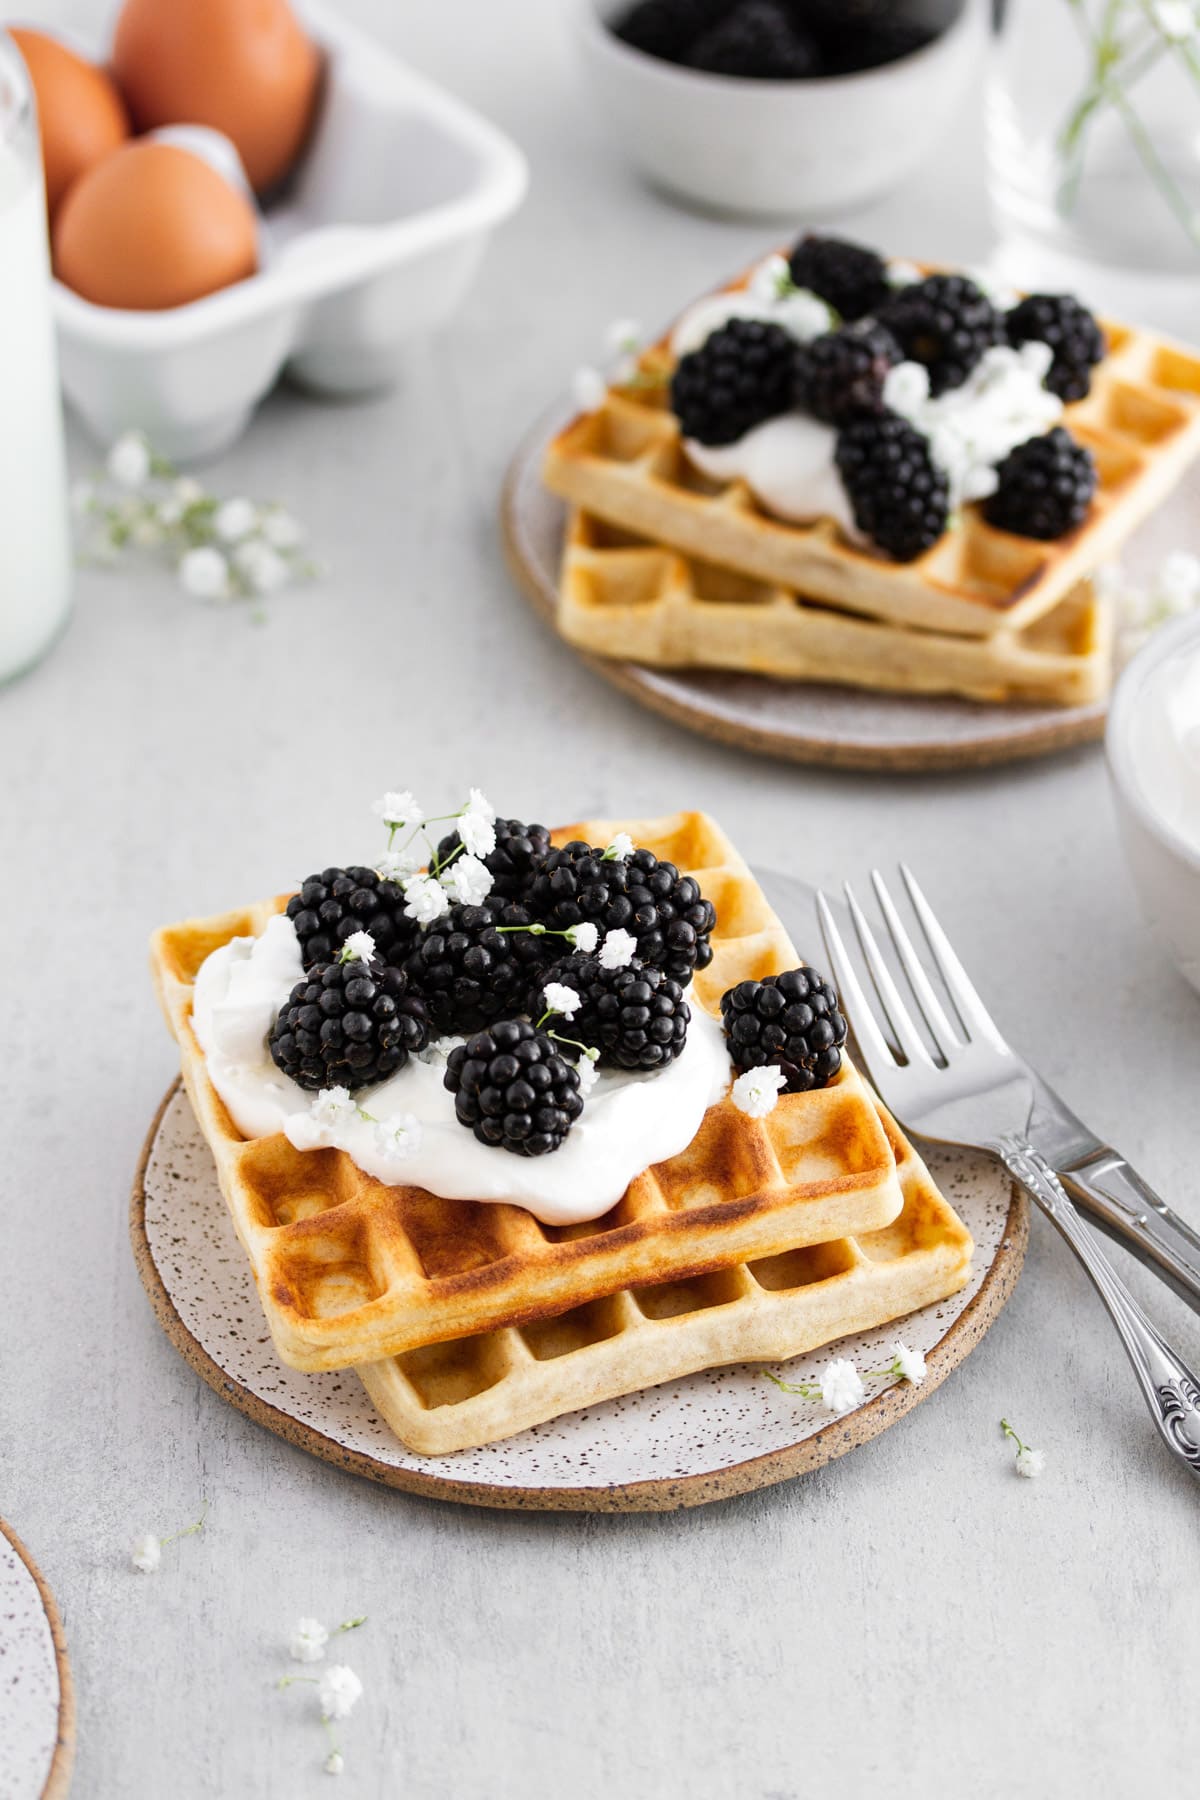 sourdough waffles with whipped cream and berries on a plate